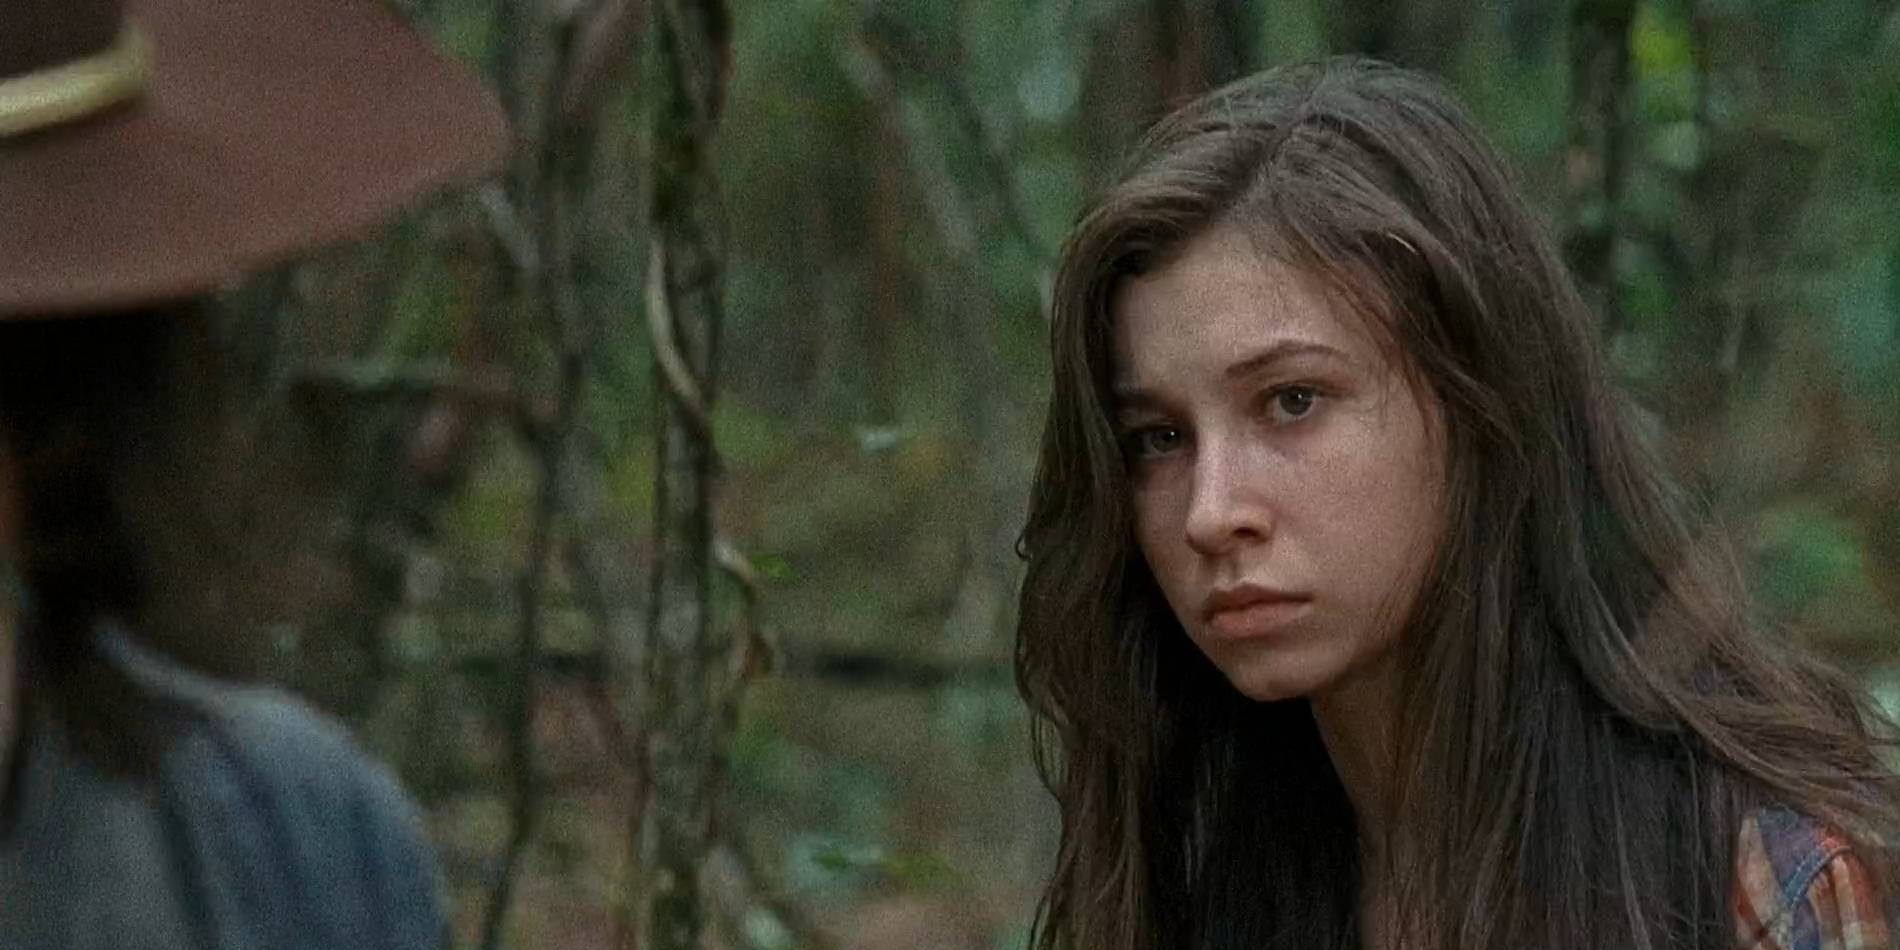 Katelyn Nacon as Enid in The Walking Dead looking upset while talking to Carl in the woods.